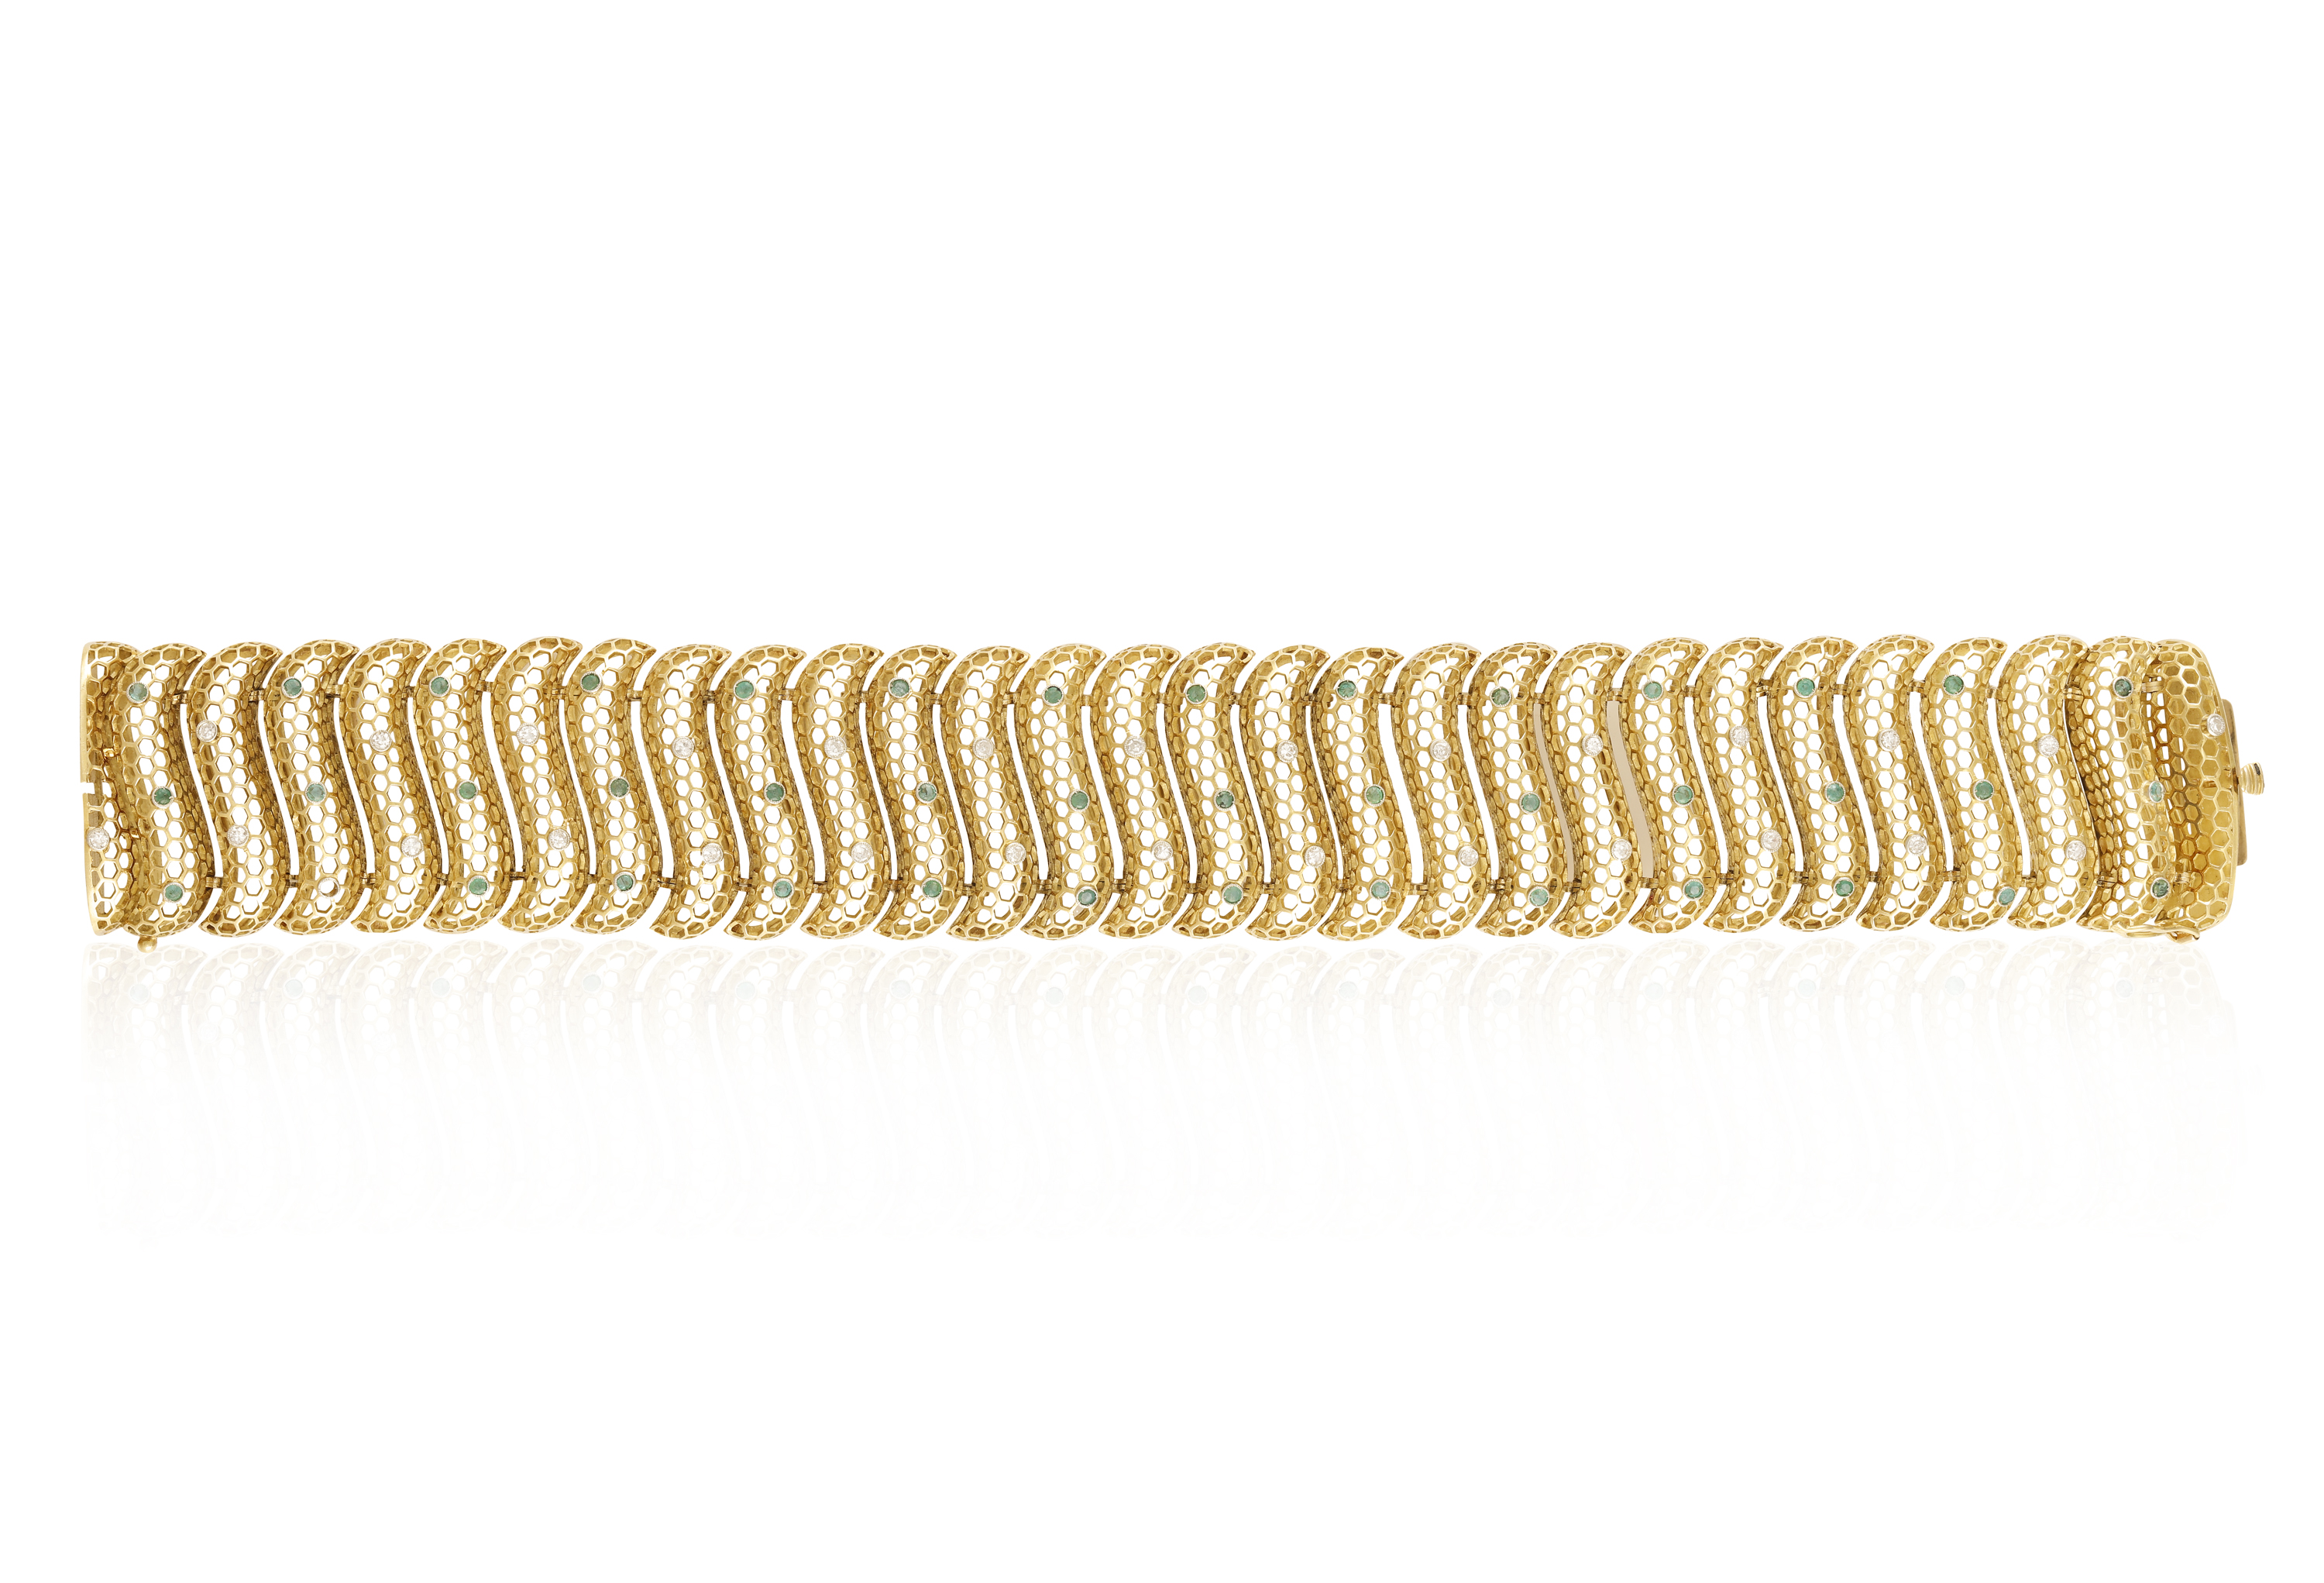 AN EMERALD AND DIAMOND BRACELET, CIRCA 1960 Composed of continuous bombé S-shaped links with